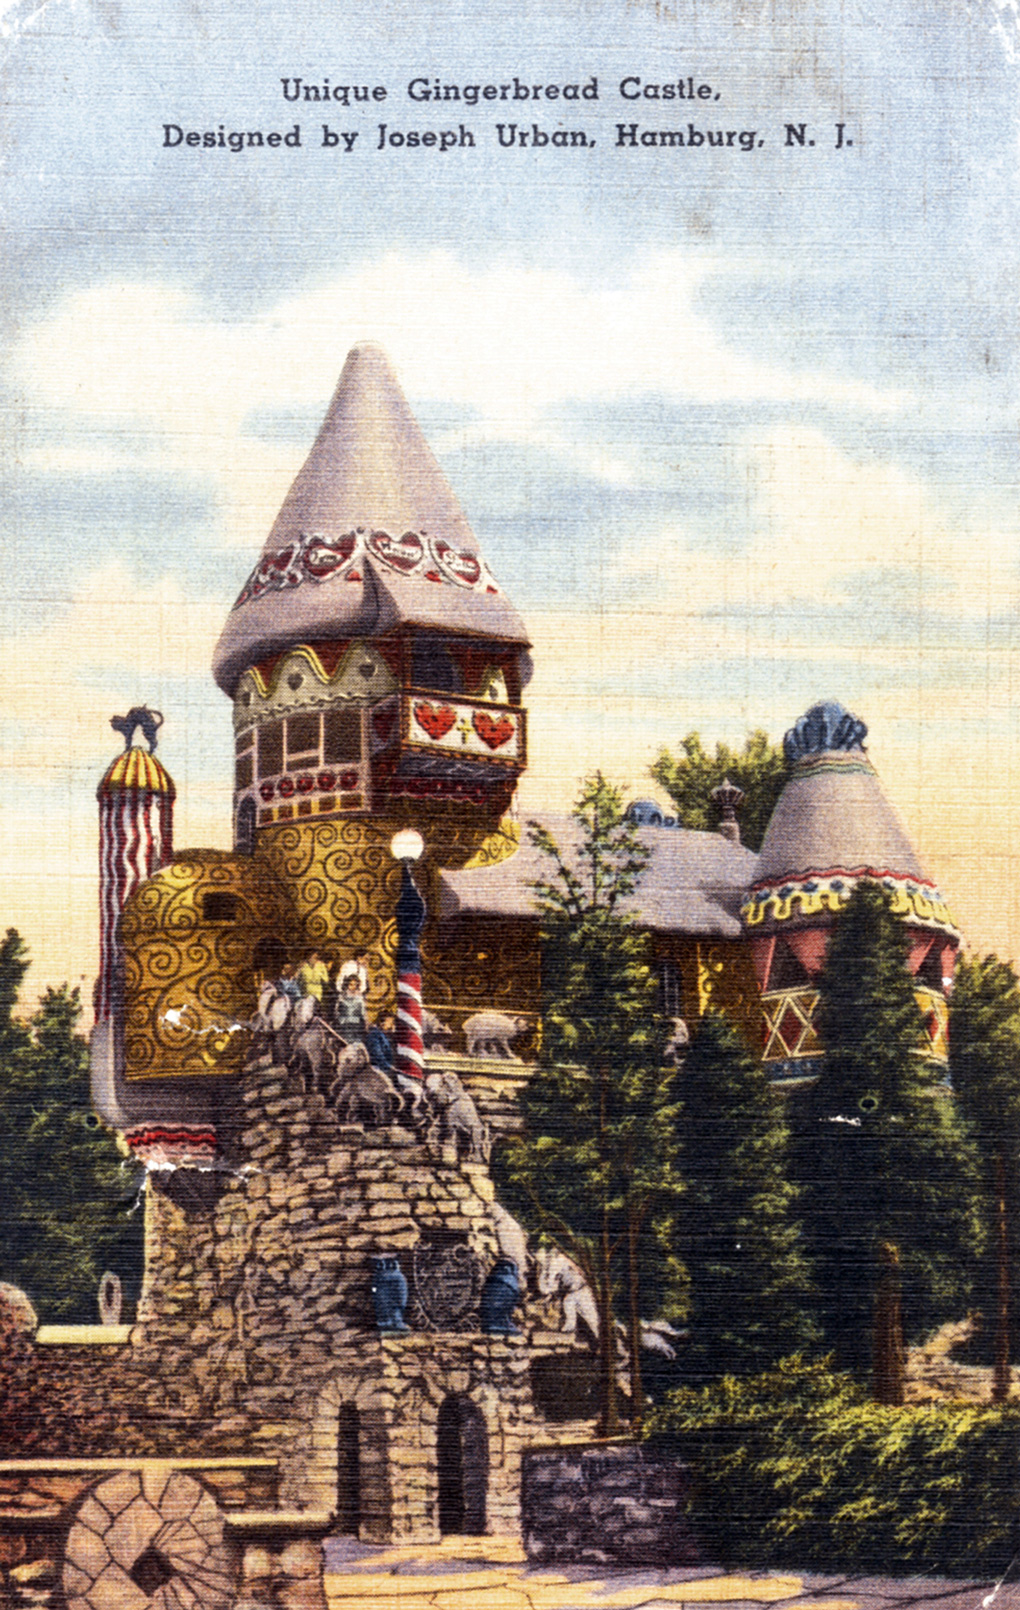 An illustration of the enchanted Gingerbread Castle on a postcard from its heyday.